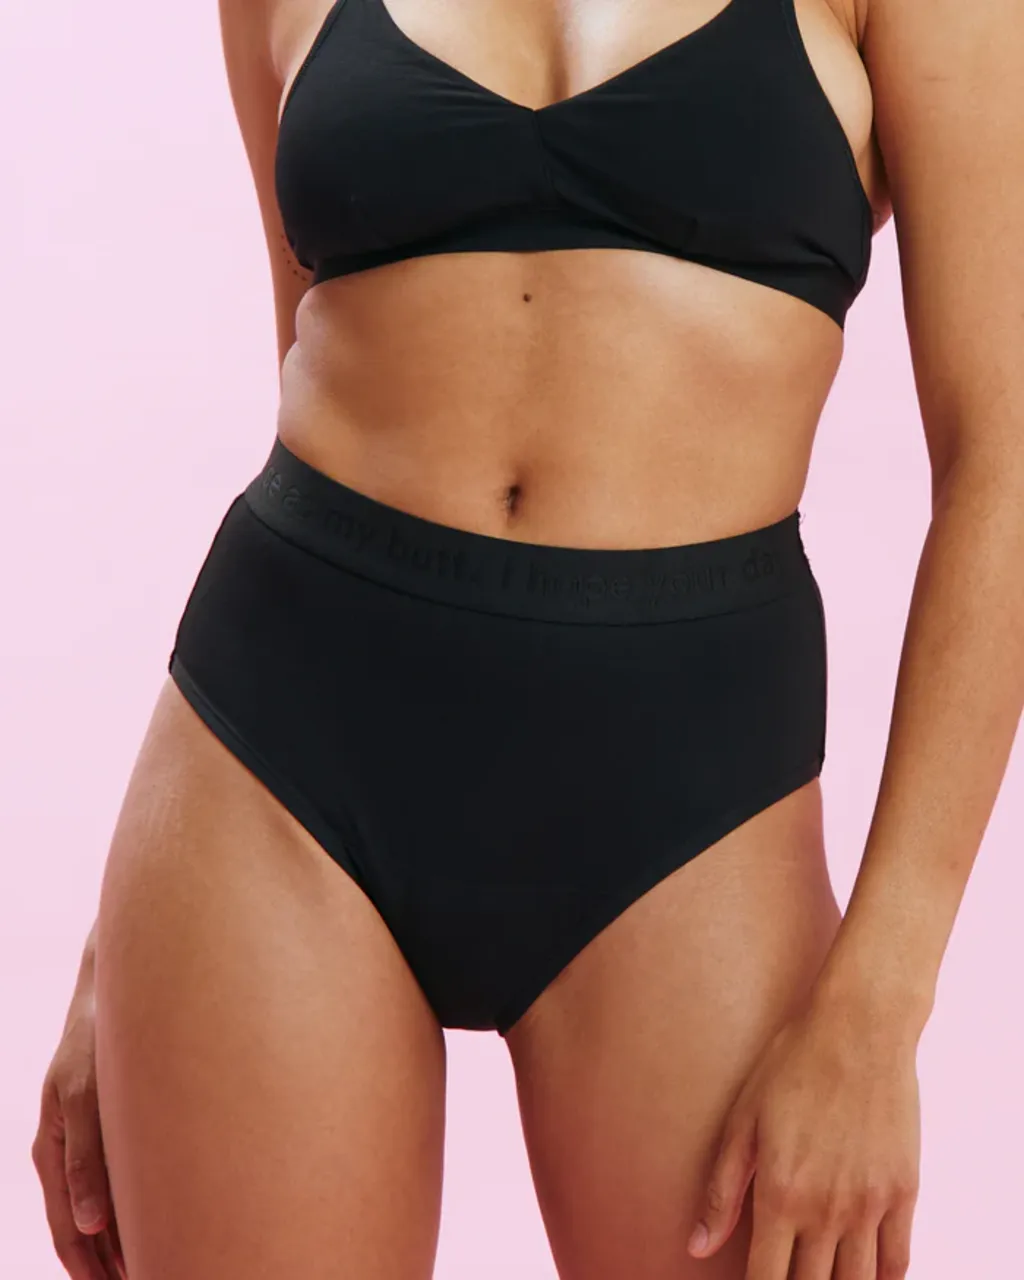 https://th.nice-cdn.com/upload/image/product/large/default/the-female-company-period-underwear-high-waist-basic-black-extra-strong-56-164356-en.webp